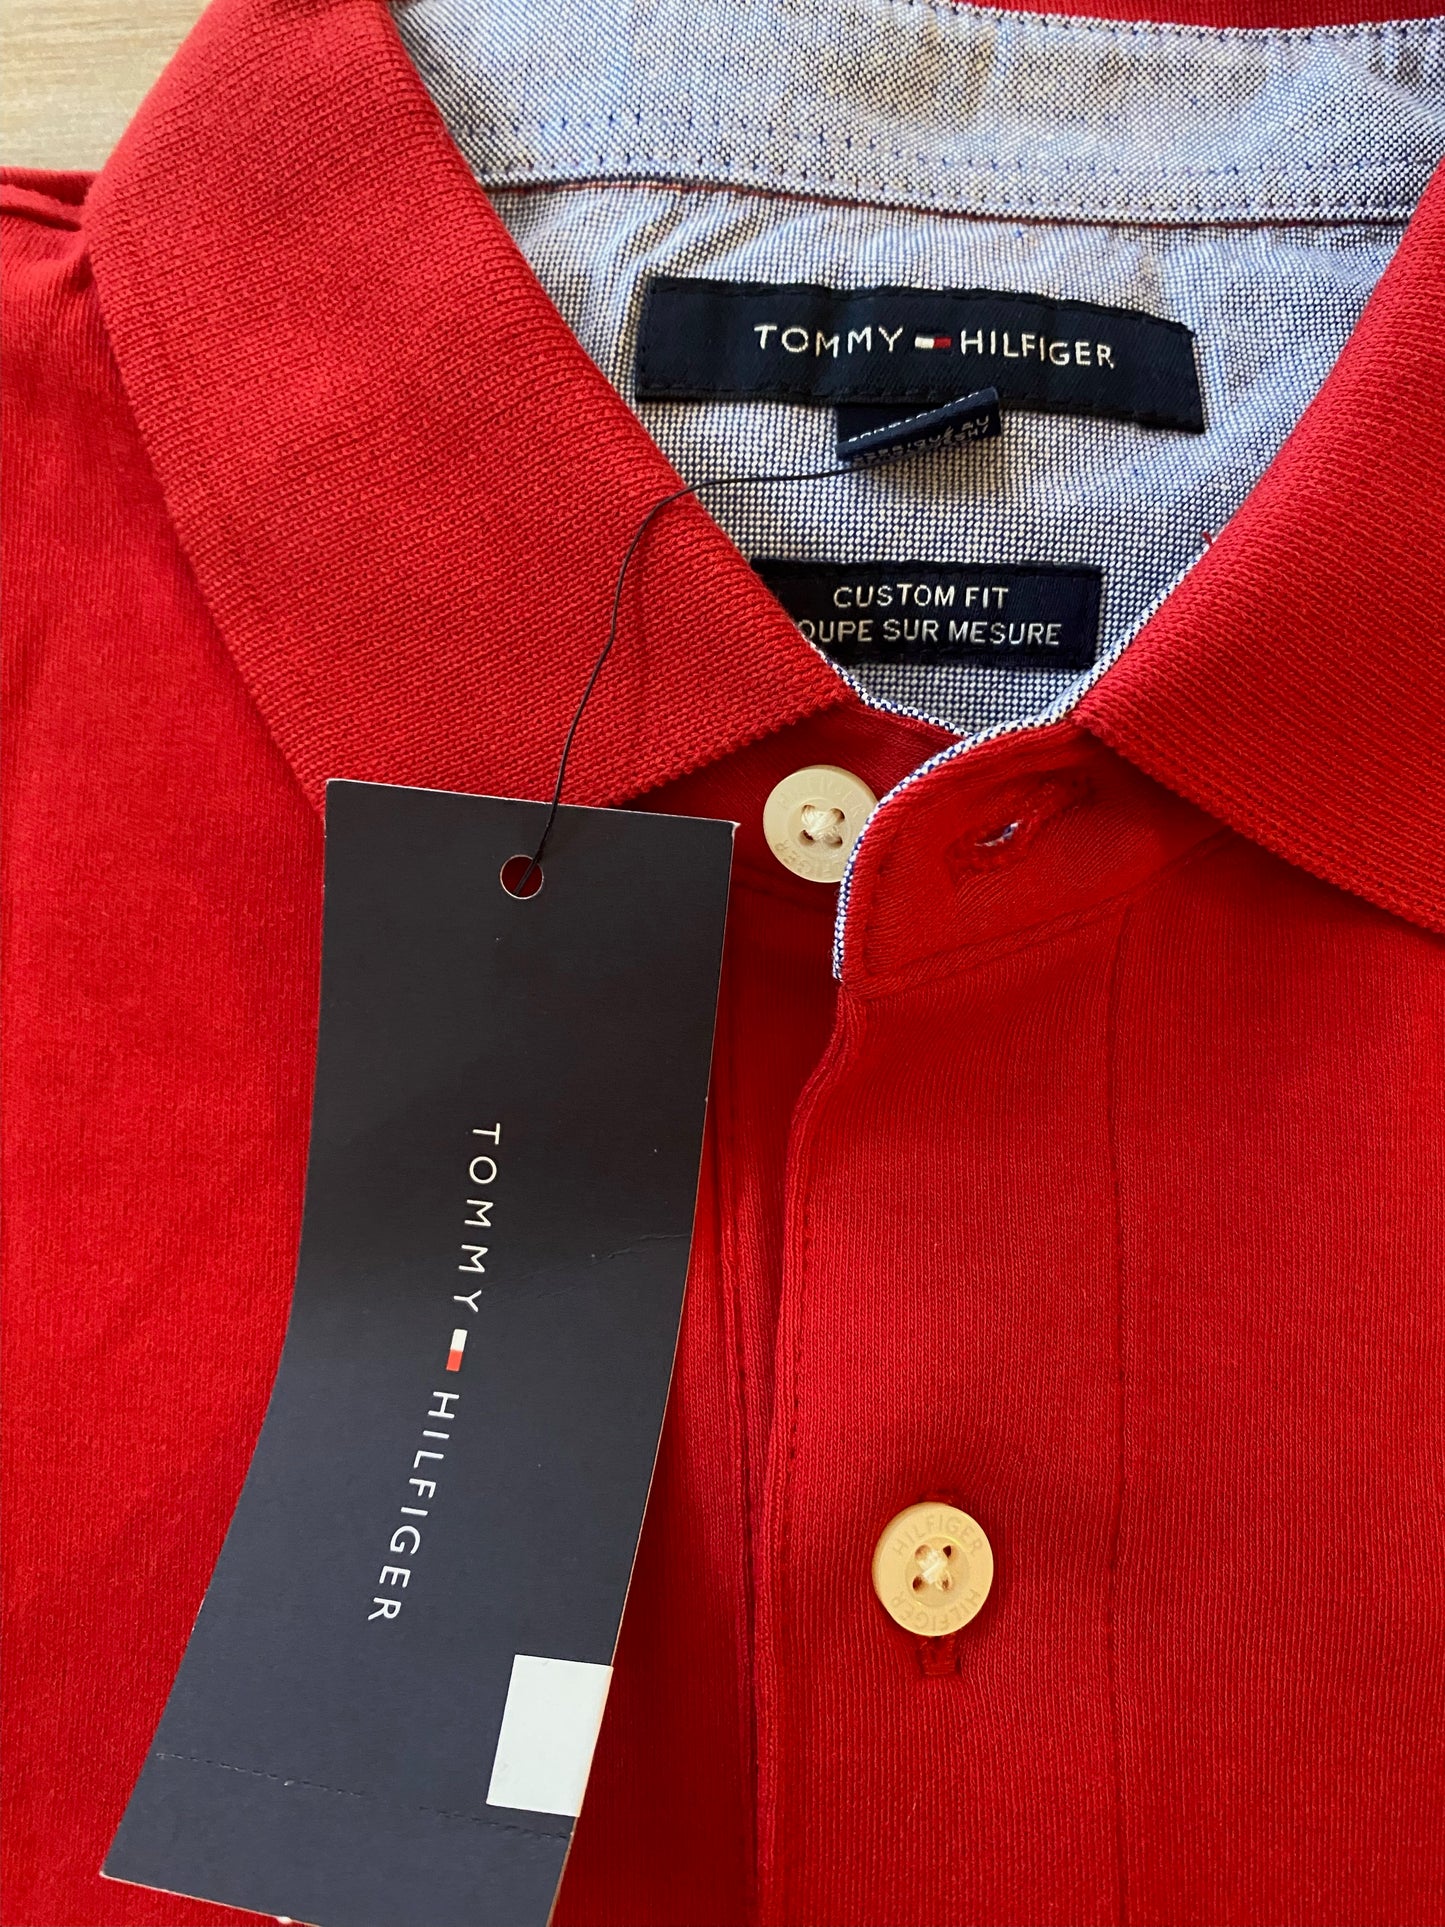 Tommy Hilfiger Red & White Color Block Polo